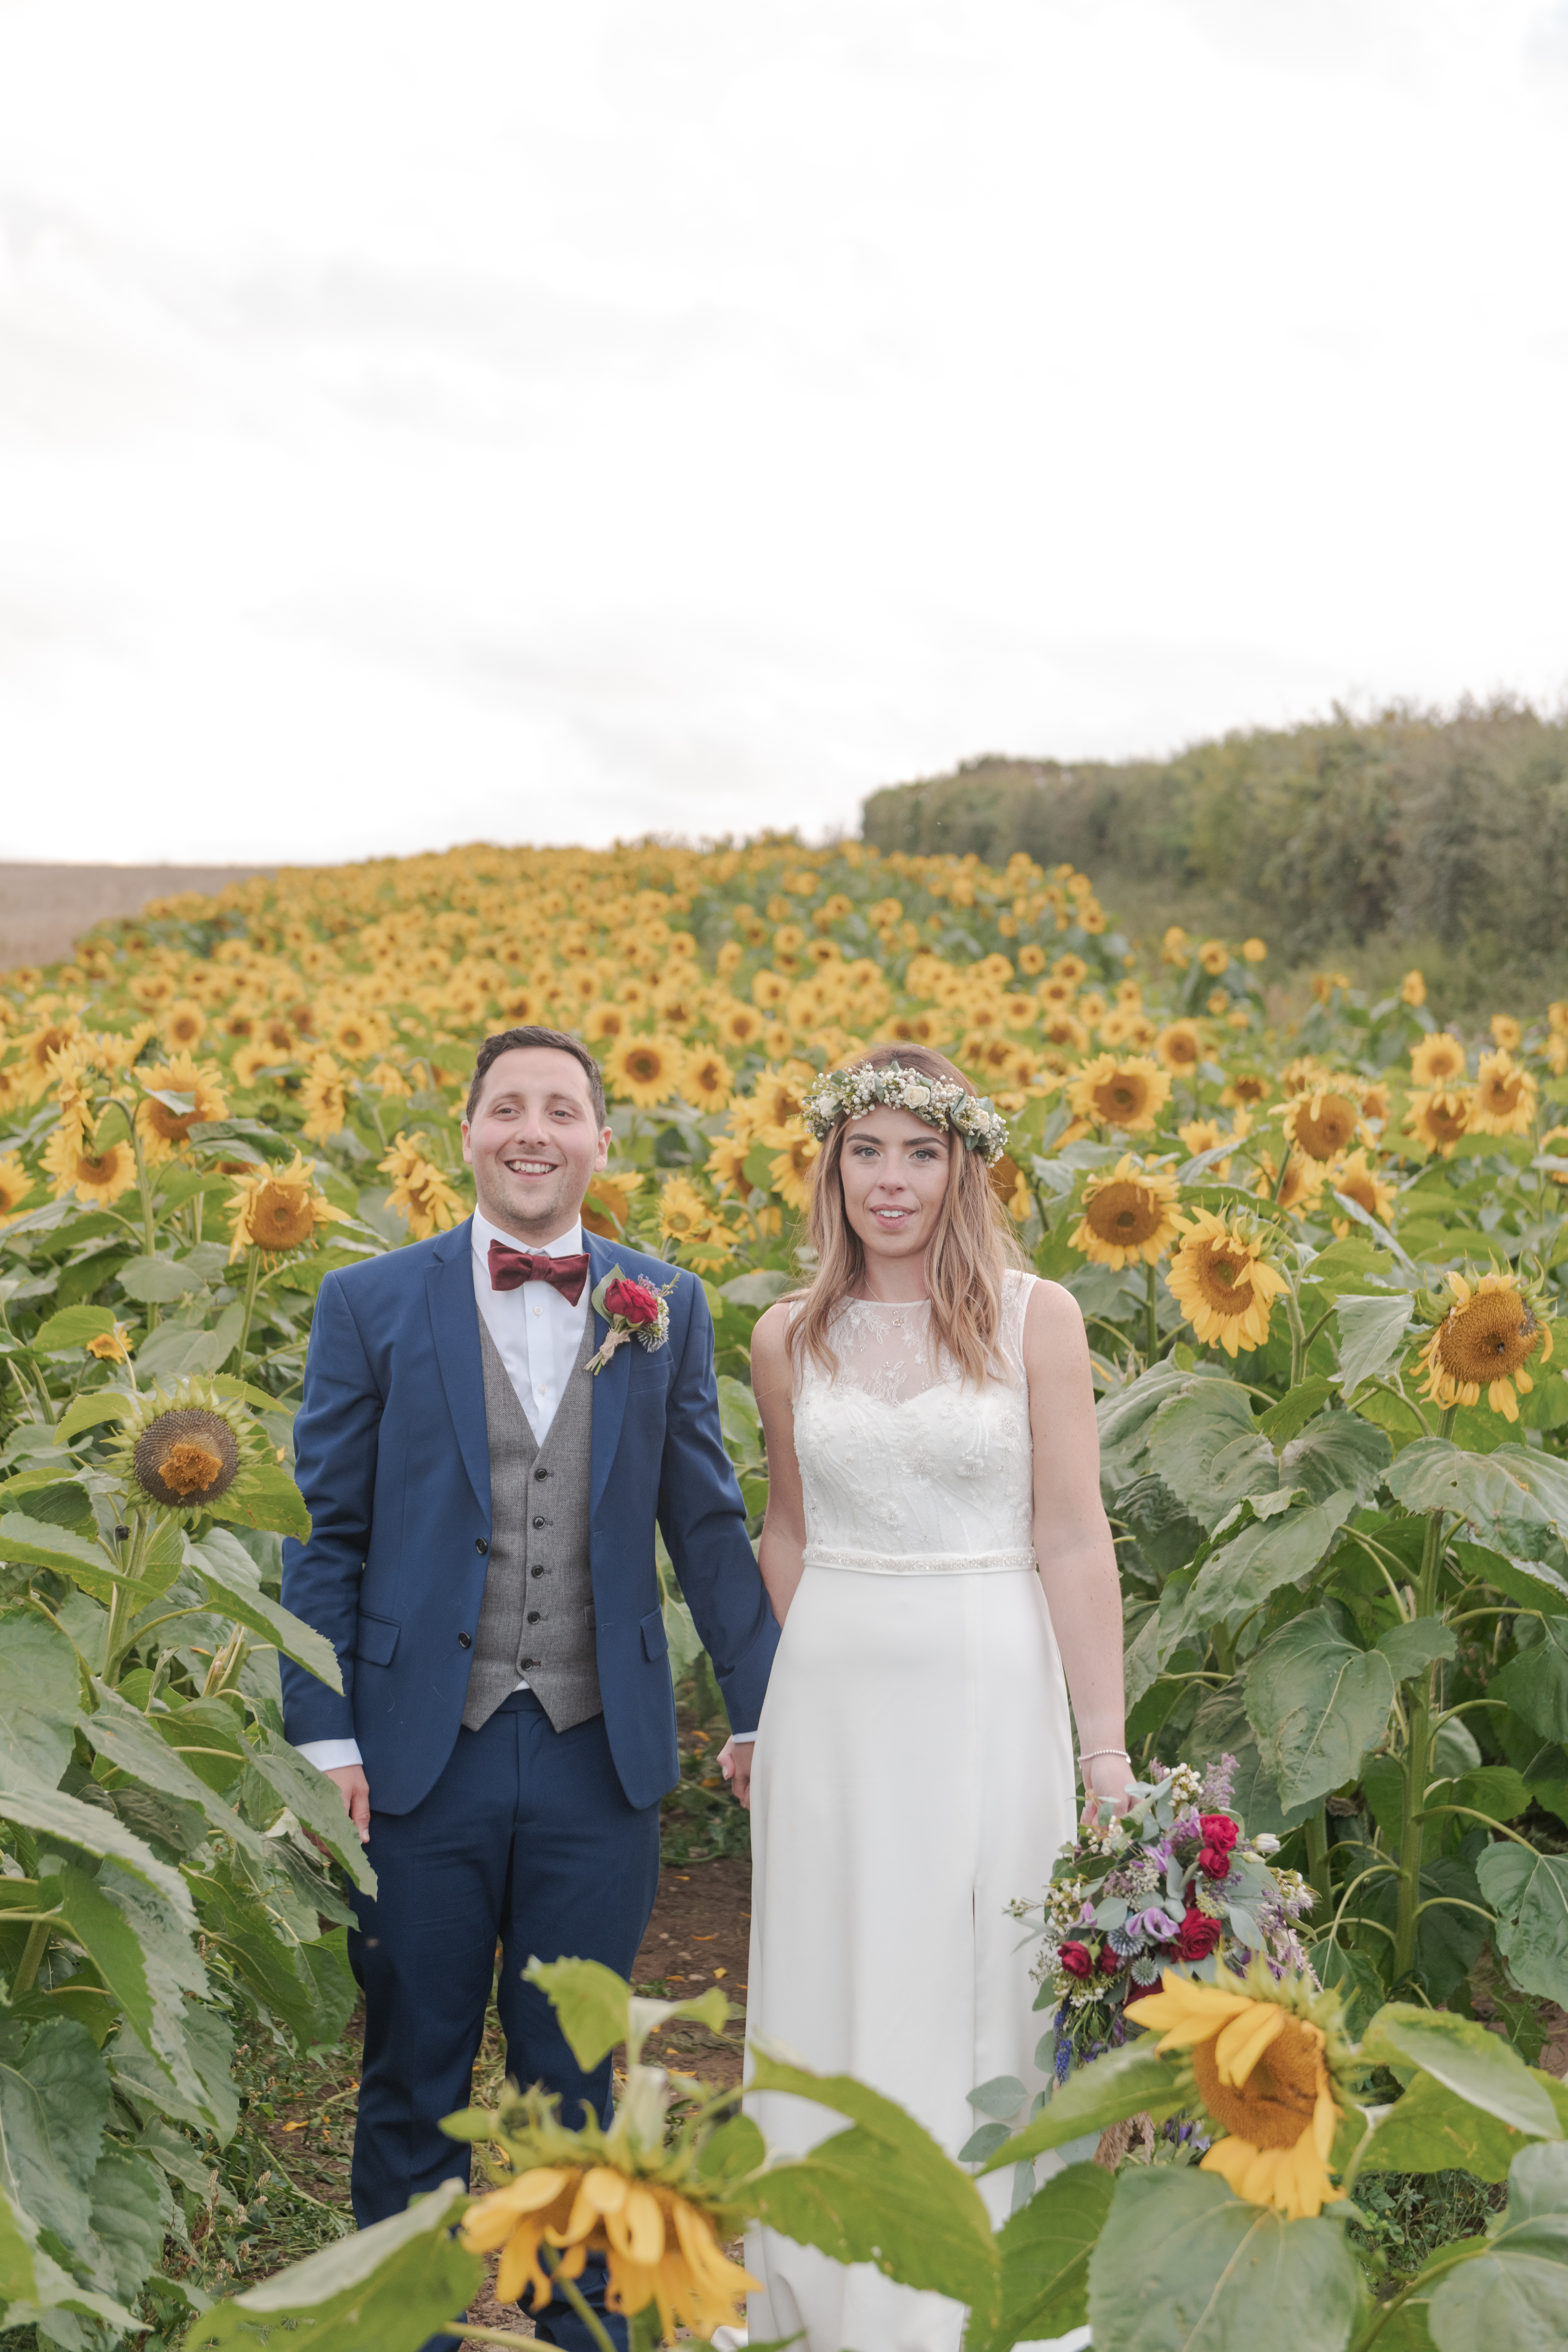 Smiling Couple on there wedding day photographed in a sunflower field at Rosedew Farm